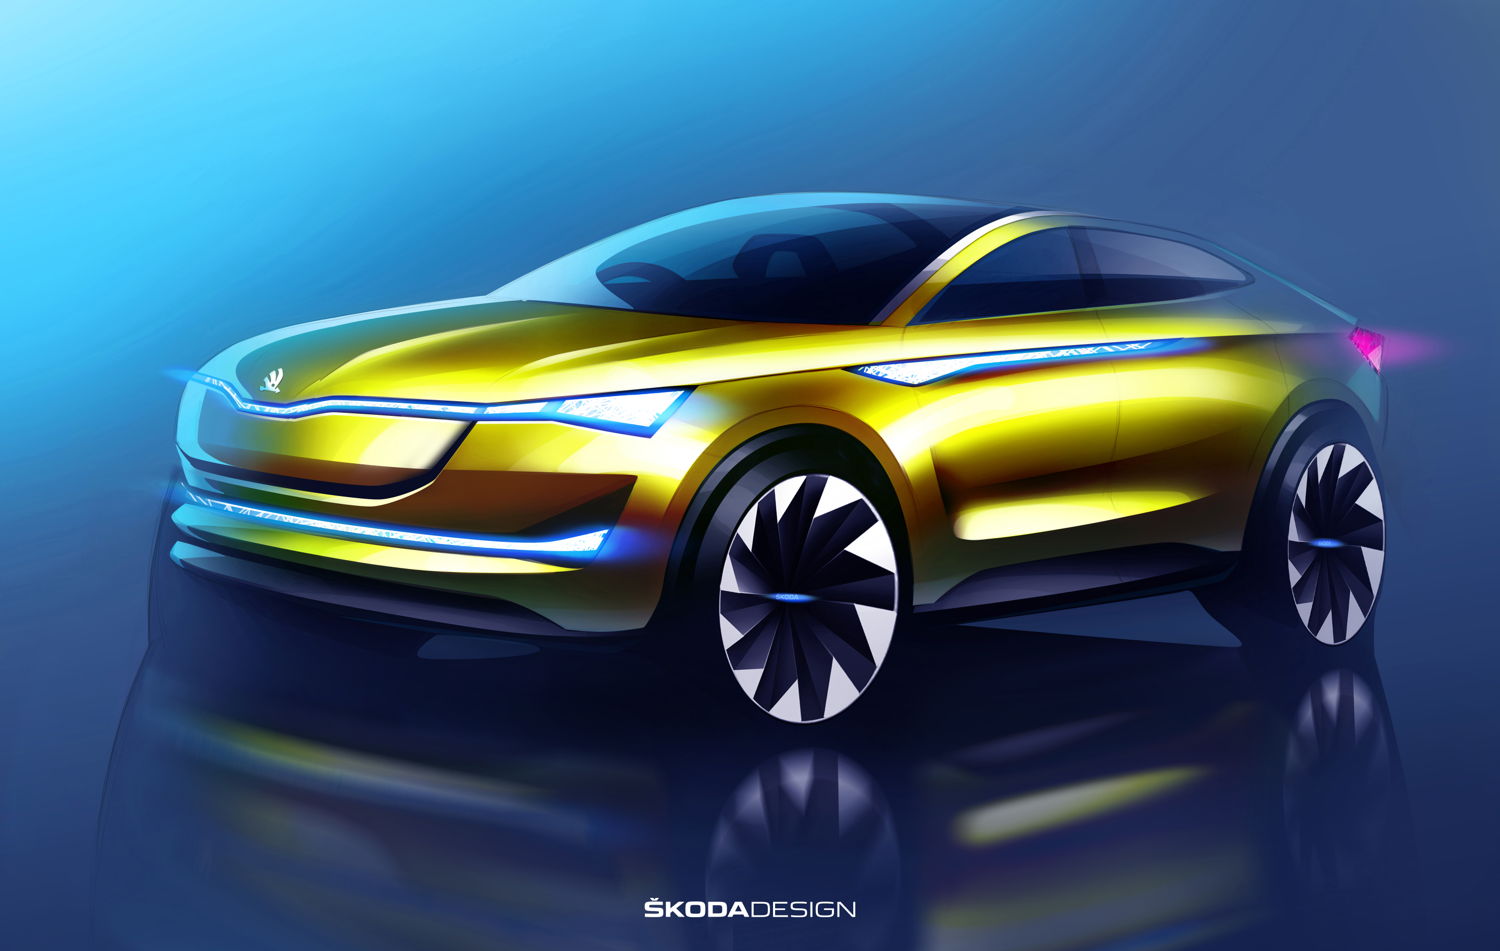 The VISION E is the first purely electric ŠKODA concept car. It can drive autonomously at level 3 and sets connectivity benchmarks.